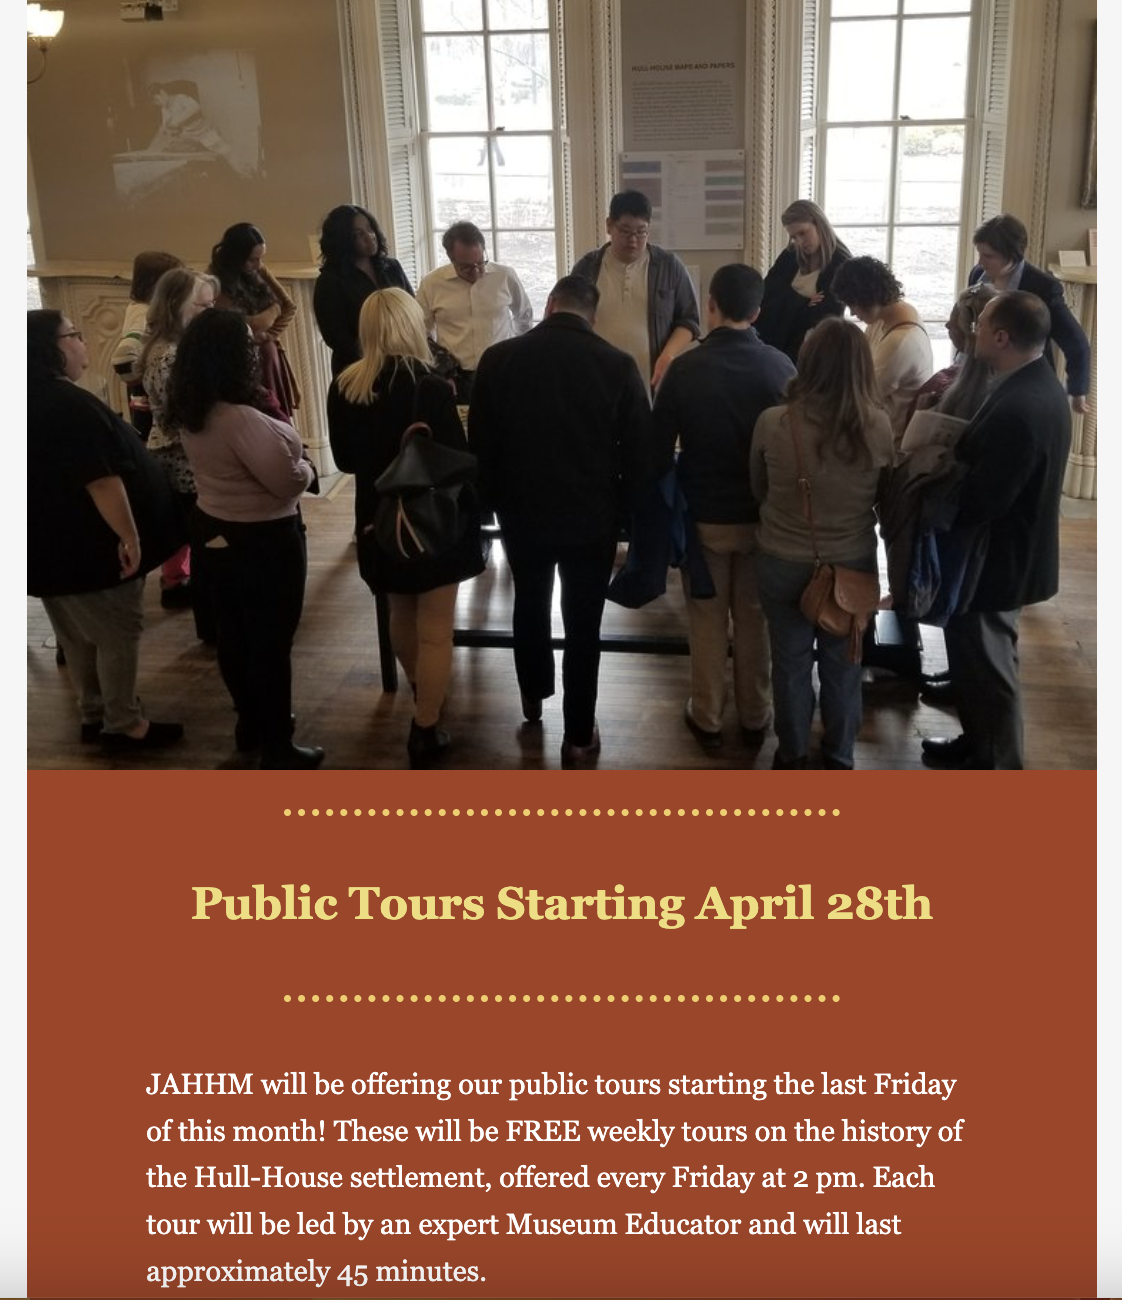  Hull-House annouces a new FREE public tour on Fridays at 2:00 PM.  